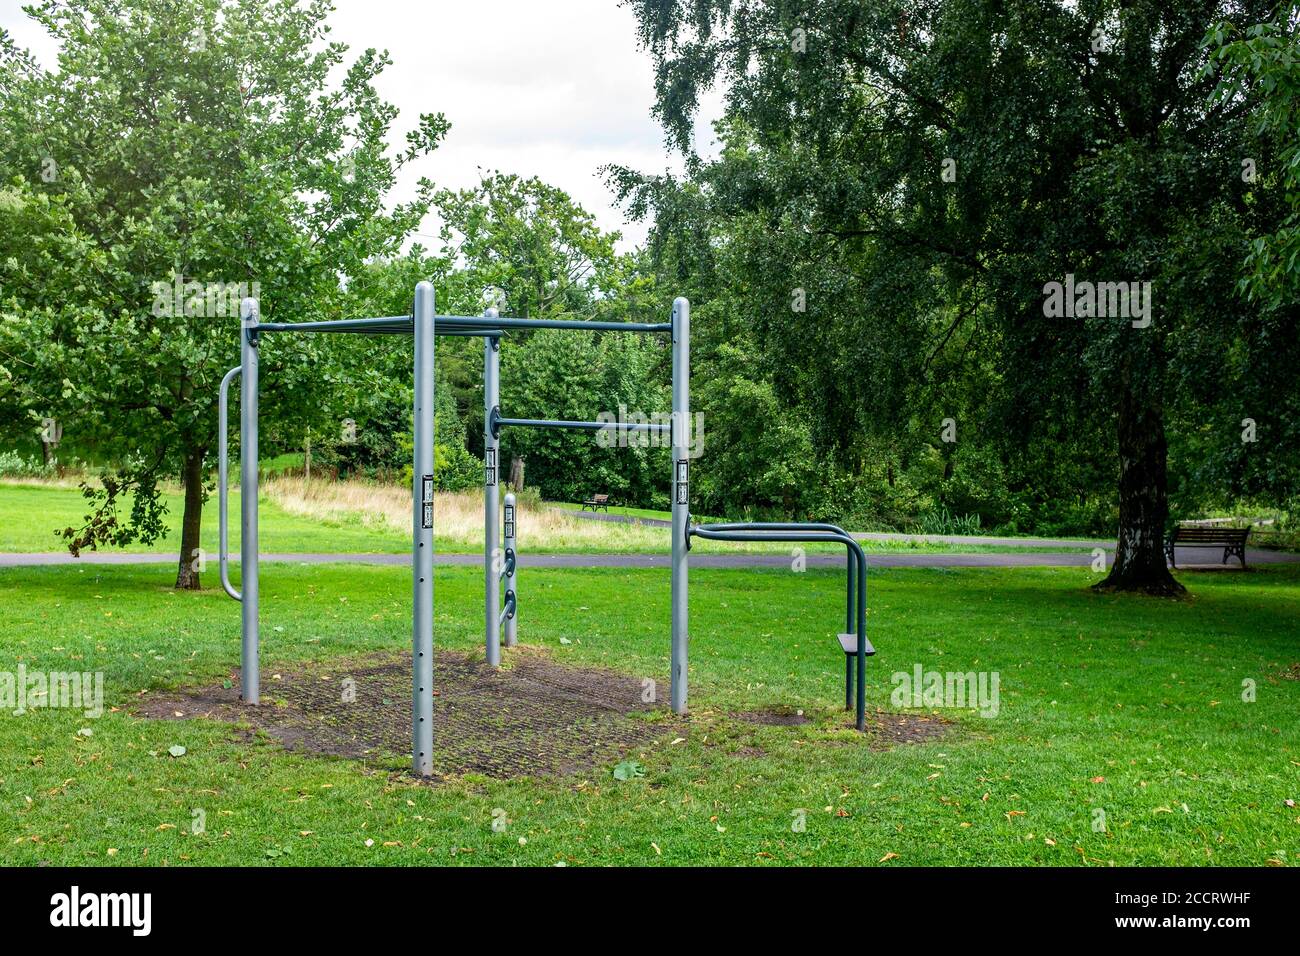 Exercise equipment in a park for free use by members of the public UK Stock Photo